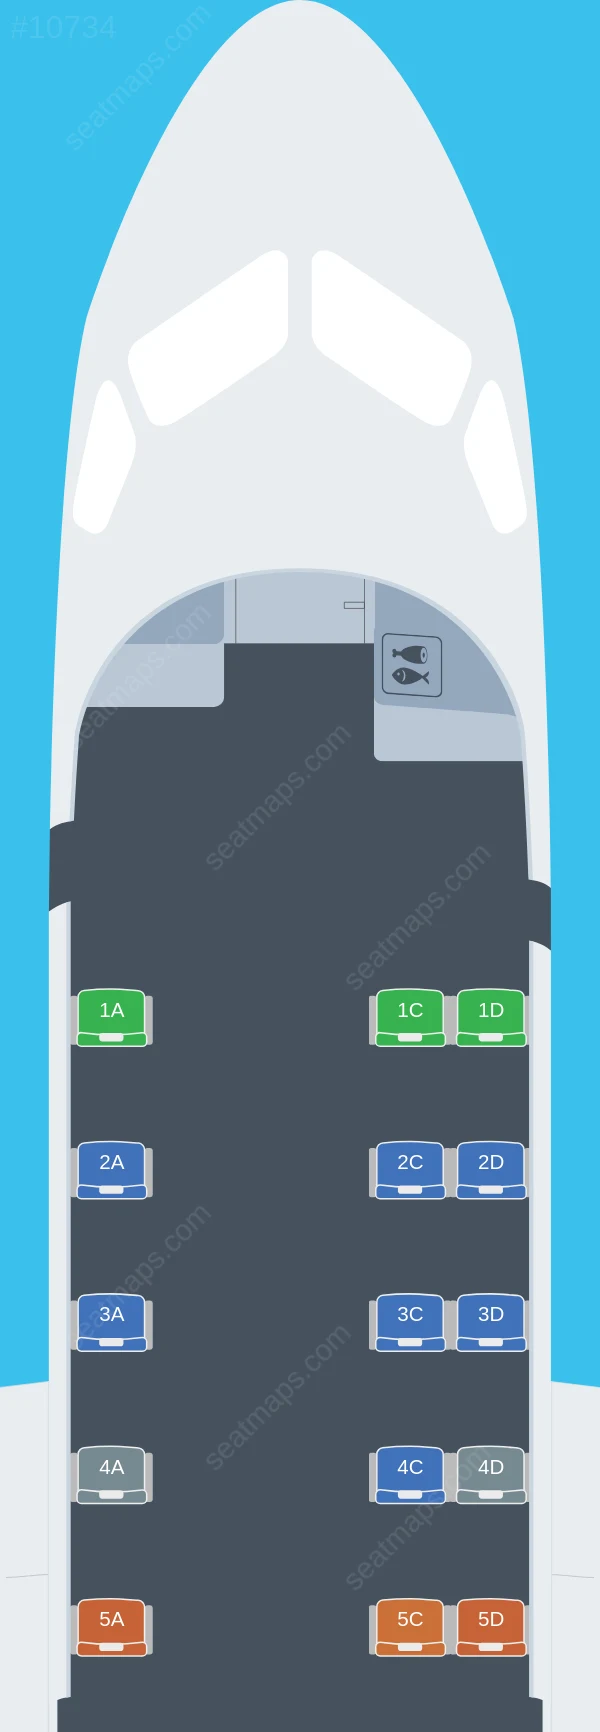 Pascan Aviation Saab S340 seatmap preview